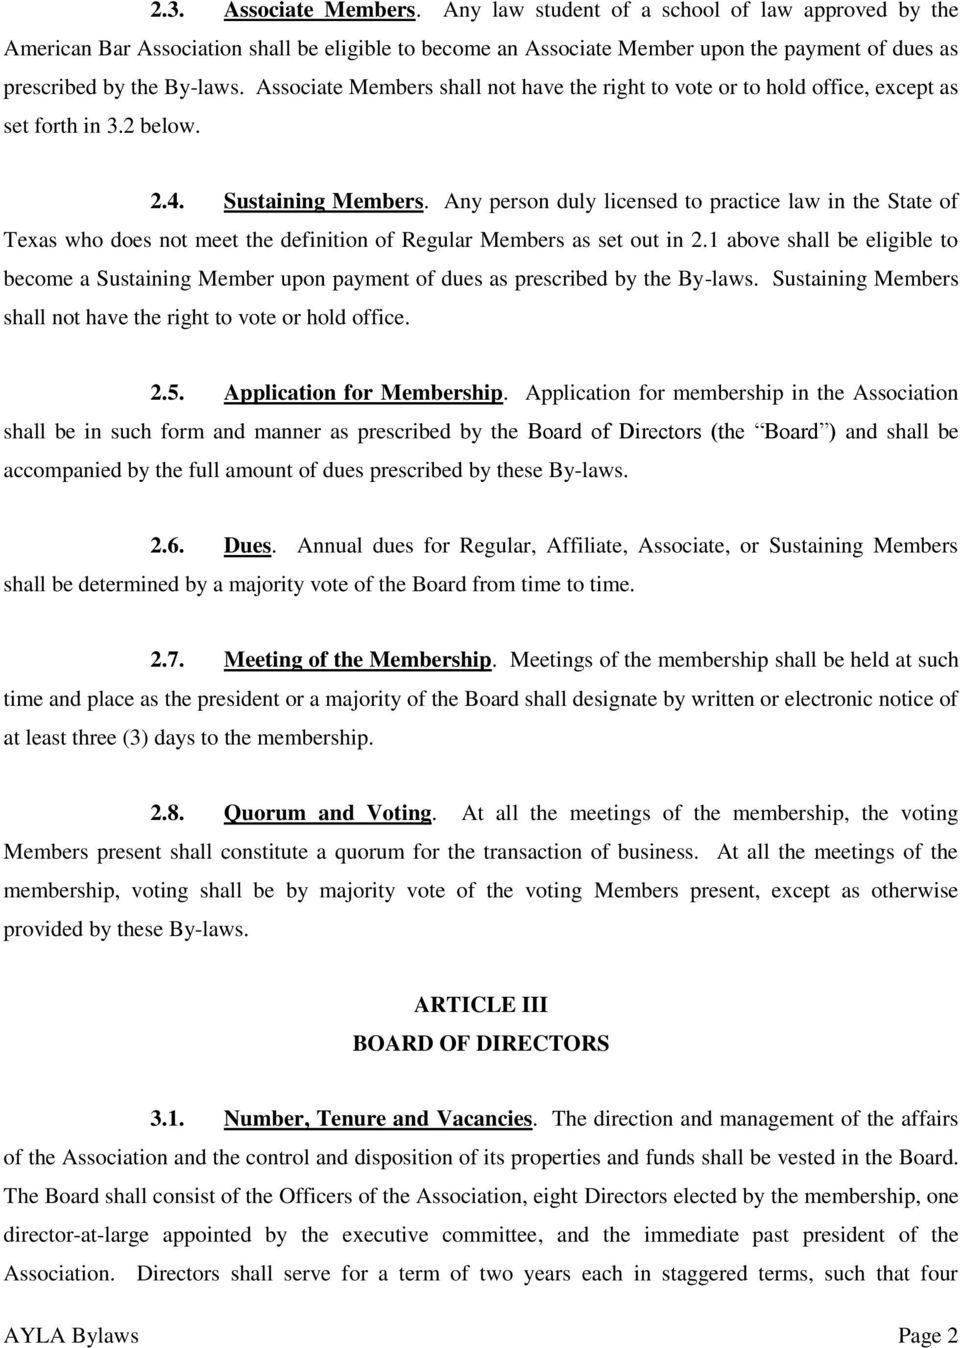 Associate Members shall not have the right to vote or to hold office, except as set forth in 3.2 below. 2.4. Sustaining Members.